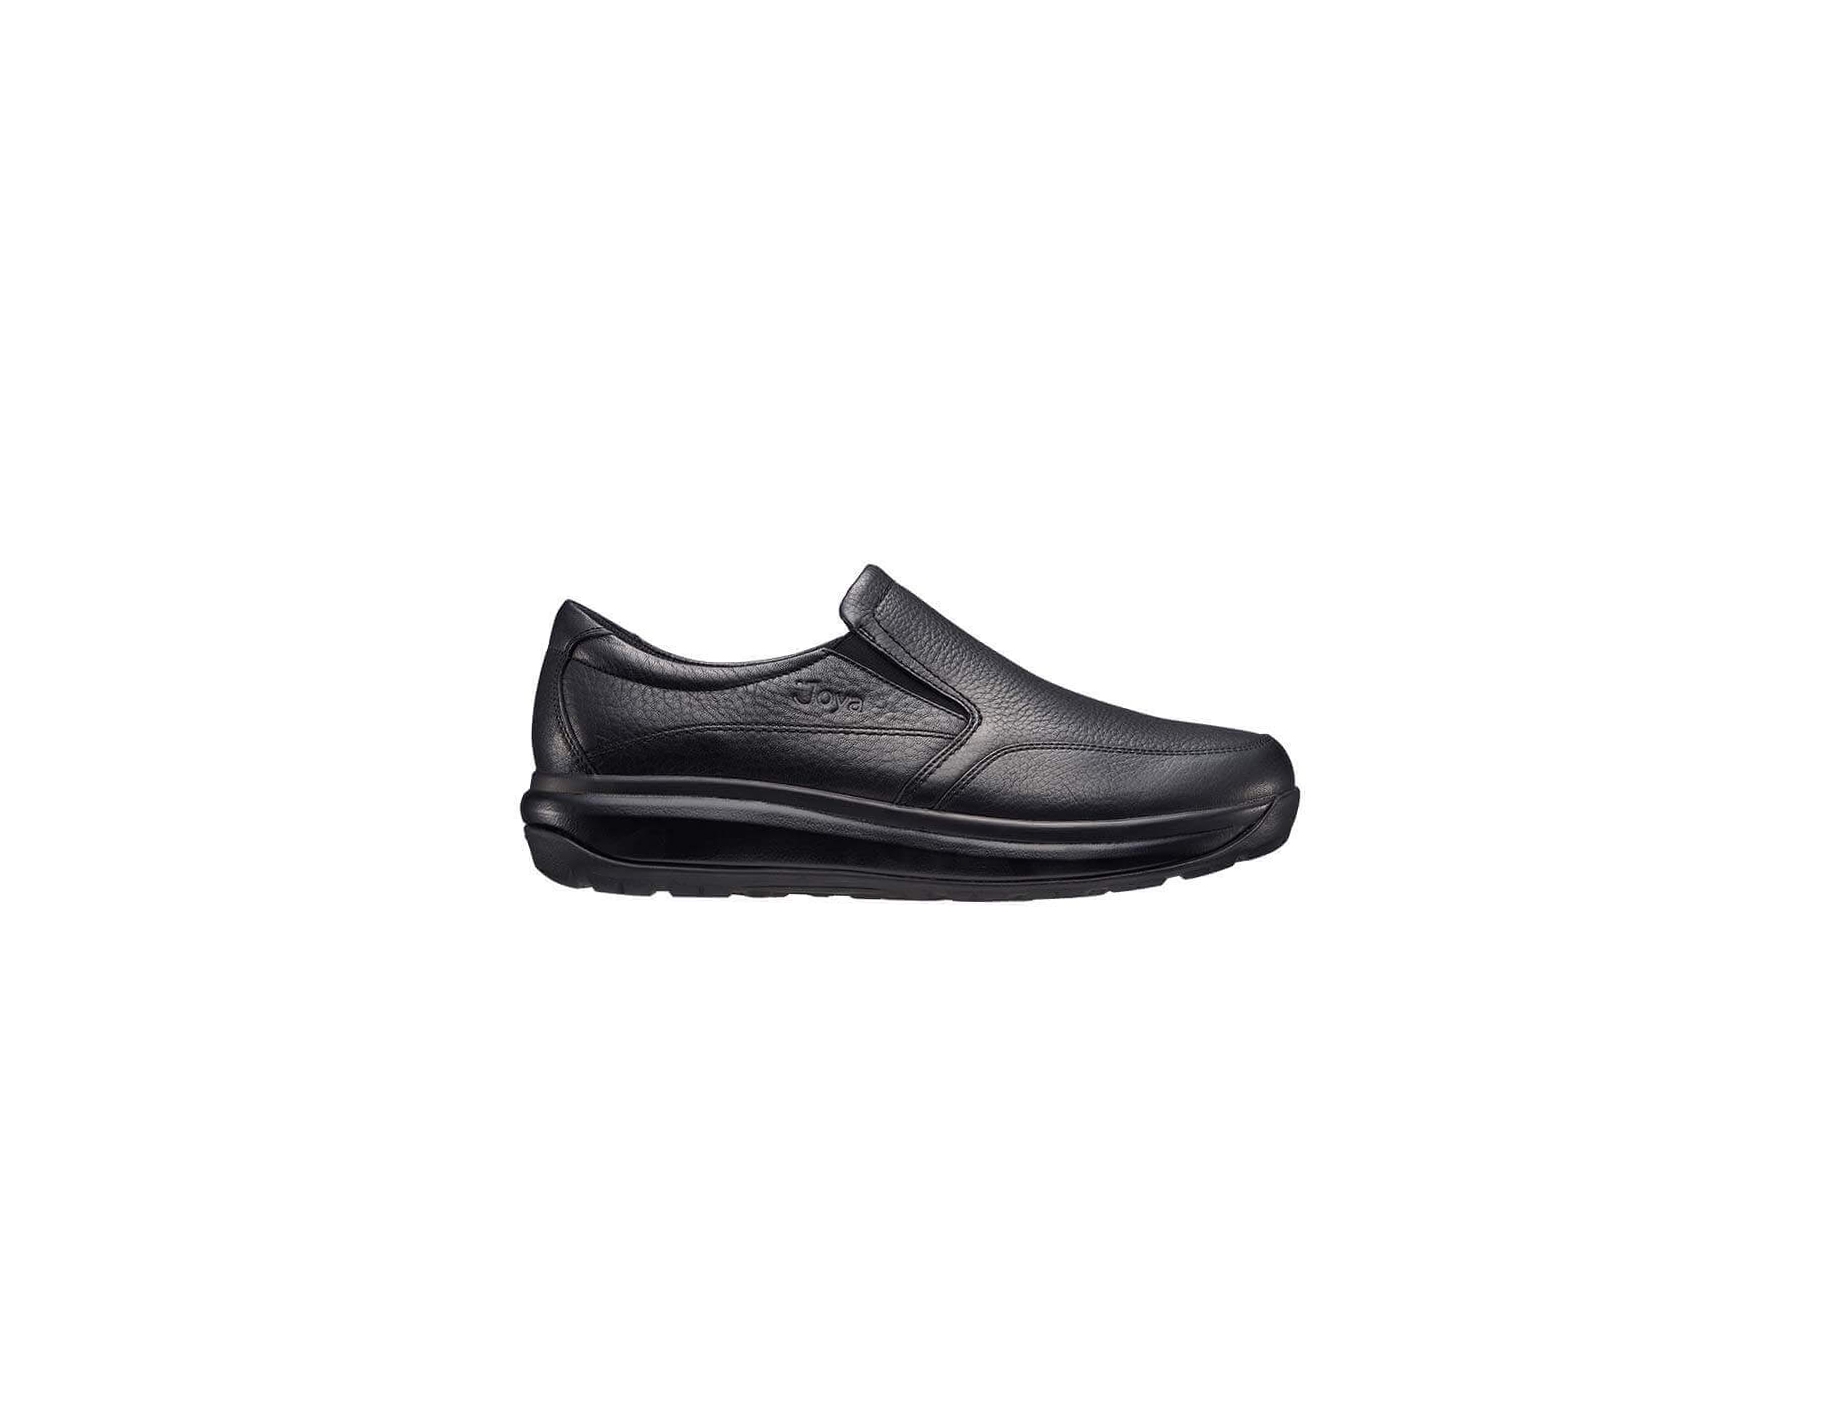 Mens Joya Traveller II – Black Formal Shoes – Slip-On – Suitable For Heel Spurs / Knee Pain – Size 12.5 – Leather / Synthetic Fabric